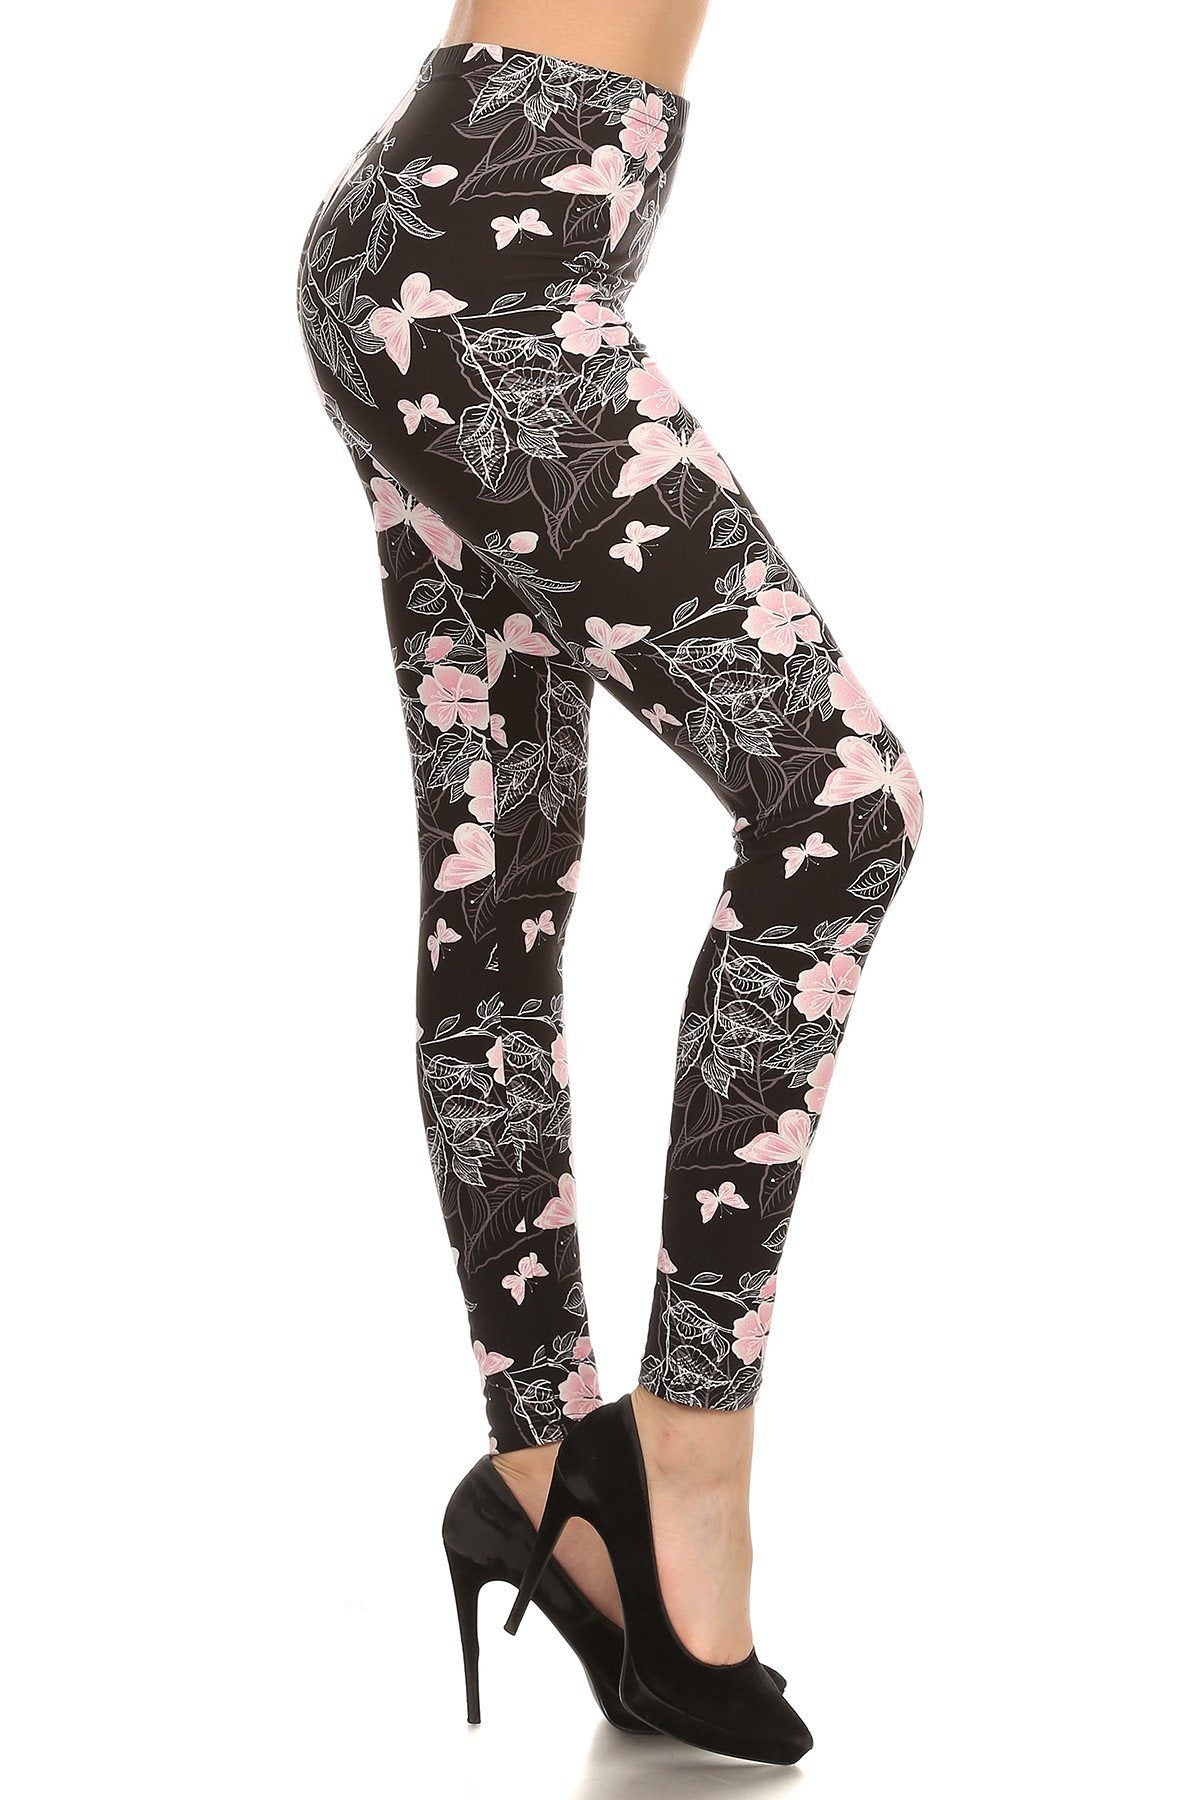 Womens Leggings | Pink Butterfly Leggings | Yoga Pants | Footless Tights |  No-Roll Waistband